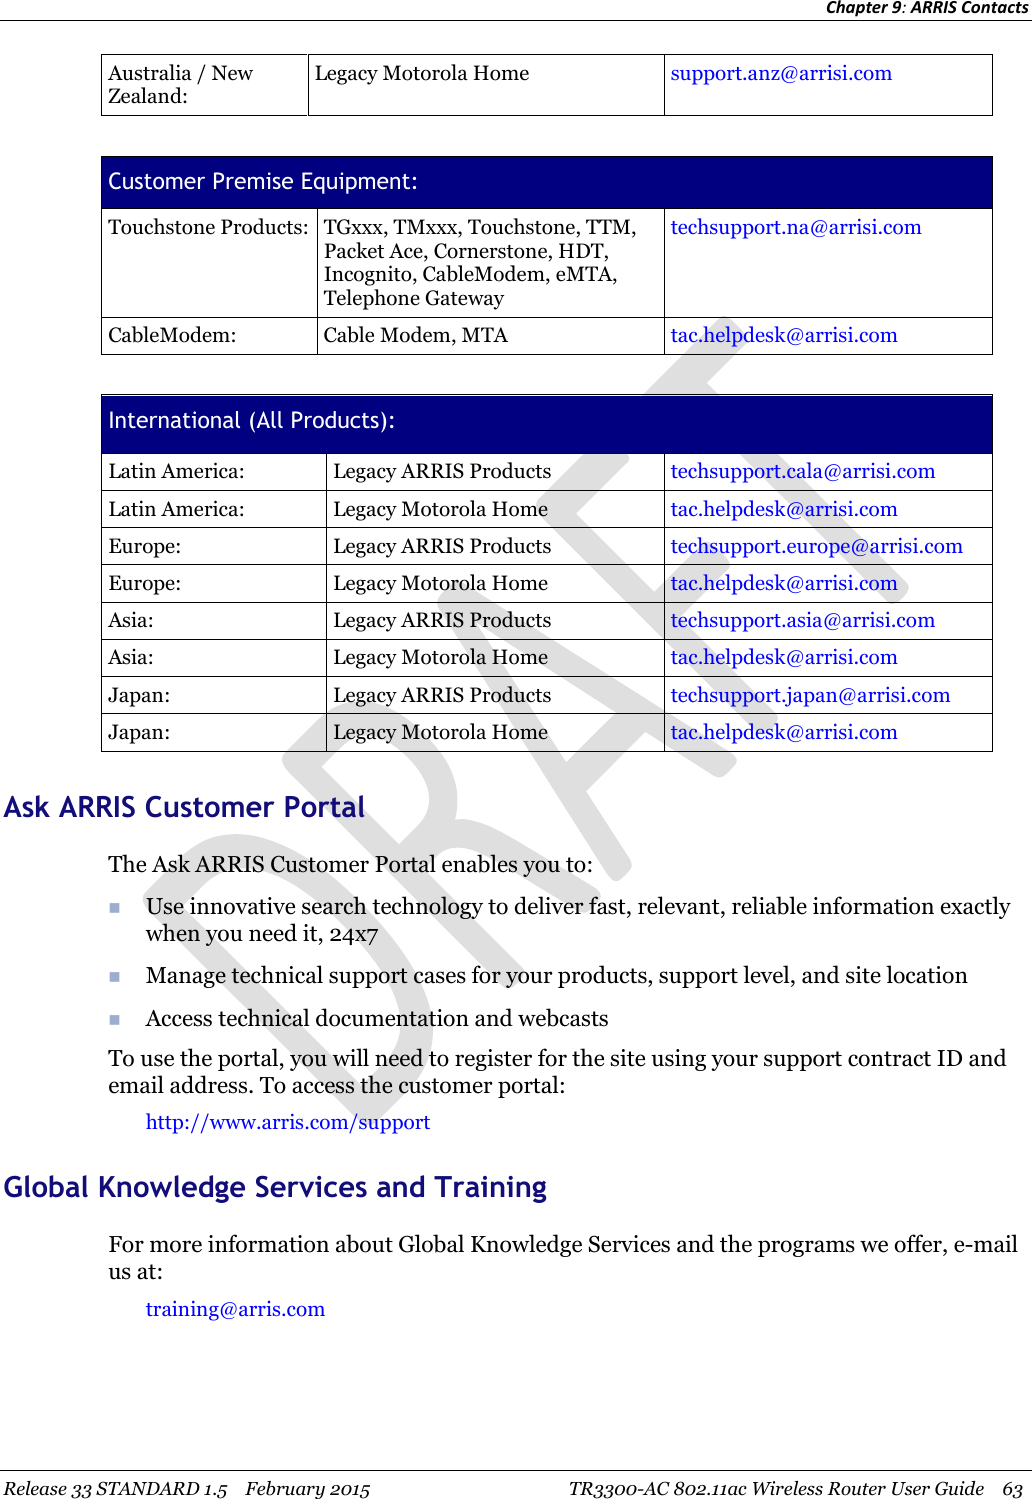 Chapter 9:ARRIS ContactsRelease 33 STANDARD 1.5 February 2015 TR3300-AC 802.11ac Wireless Router User Guide 63Australia / NewZealand:Legacy Motorola Home support.anz@arrisi.comCustomer Premise Equipment:Touchstone Products: TGxxx, TMxxx, Touchstone, TTM,Packet Ace, Cornerstone, HDT,Incognito, CableModem, eMTA,Telephone Gatewaytechsupport.na@arrisi.comCableModem: Cable Modem, MTA tac.helpdesk@arrisi.comInternational (All Products):Latin America: Legacy ARRIS Products techsupport.cala@arrisi.comLatin America: Legacy Motorola Home tac.helpdesk@arrisi.comEurope: Legacy ARRIS Products techsupport.europe@arrisi.comEurope: Legacy Motorola Home tac.helpdesk@arrisi.comAsia: Legacy ARRIS Products techsupport.asia@arrisi.comAsia: Legacy Motorola Home tac.helpdesk@arrisi.comJapan: Legacy ARRIS Products techsupport.japan@arrisi.comJapan: Legacy Motorola Home tac.helpdesk@arrisi.comAsk ARRIS Customer PortalThe Ask ARRIS Customer Portal enables you to:Use innovative search technology to deliver fast, relevant, reliable information exactlywhen you need it, 24x7Manage technical support cases for your products, support level, and site locationAccess technical documentation and webcastsTo use the portal, you will need to register for the site using your support contract ID andemail address. To access the customer portal:http://www.arris.com/supportGlobal Knowledge Services and TrainingFor more information about Global Knowledge Services and the programs we offer, e-mailus at:training@arris.com